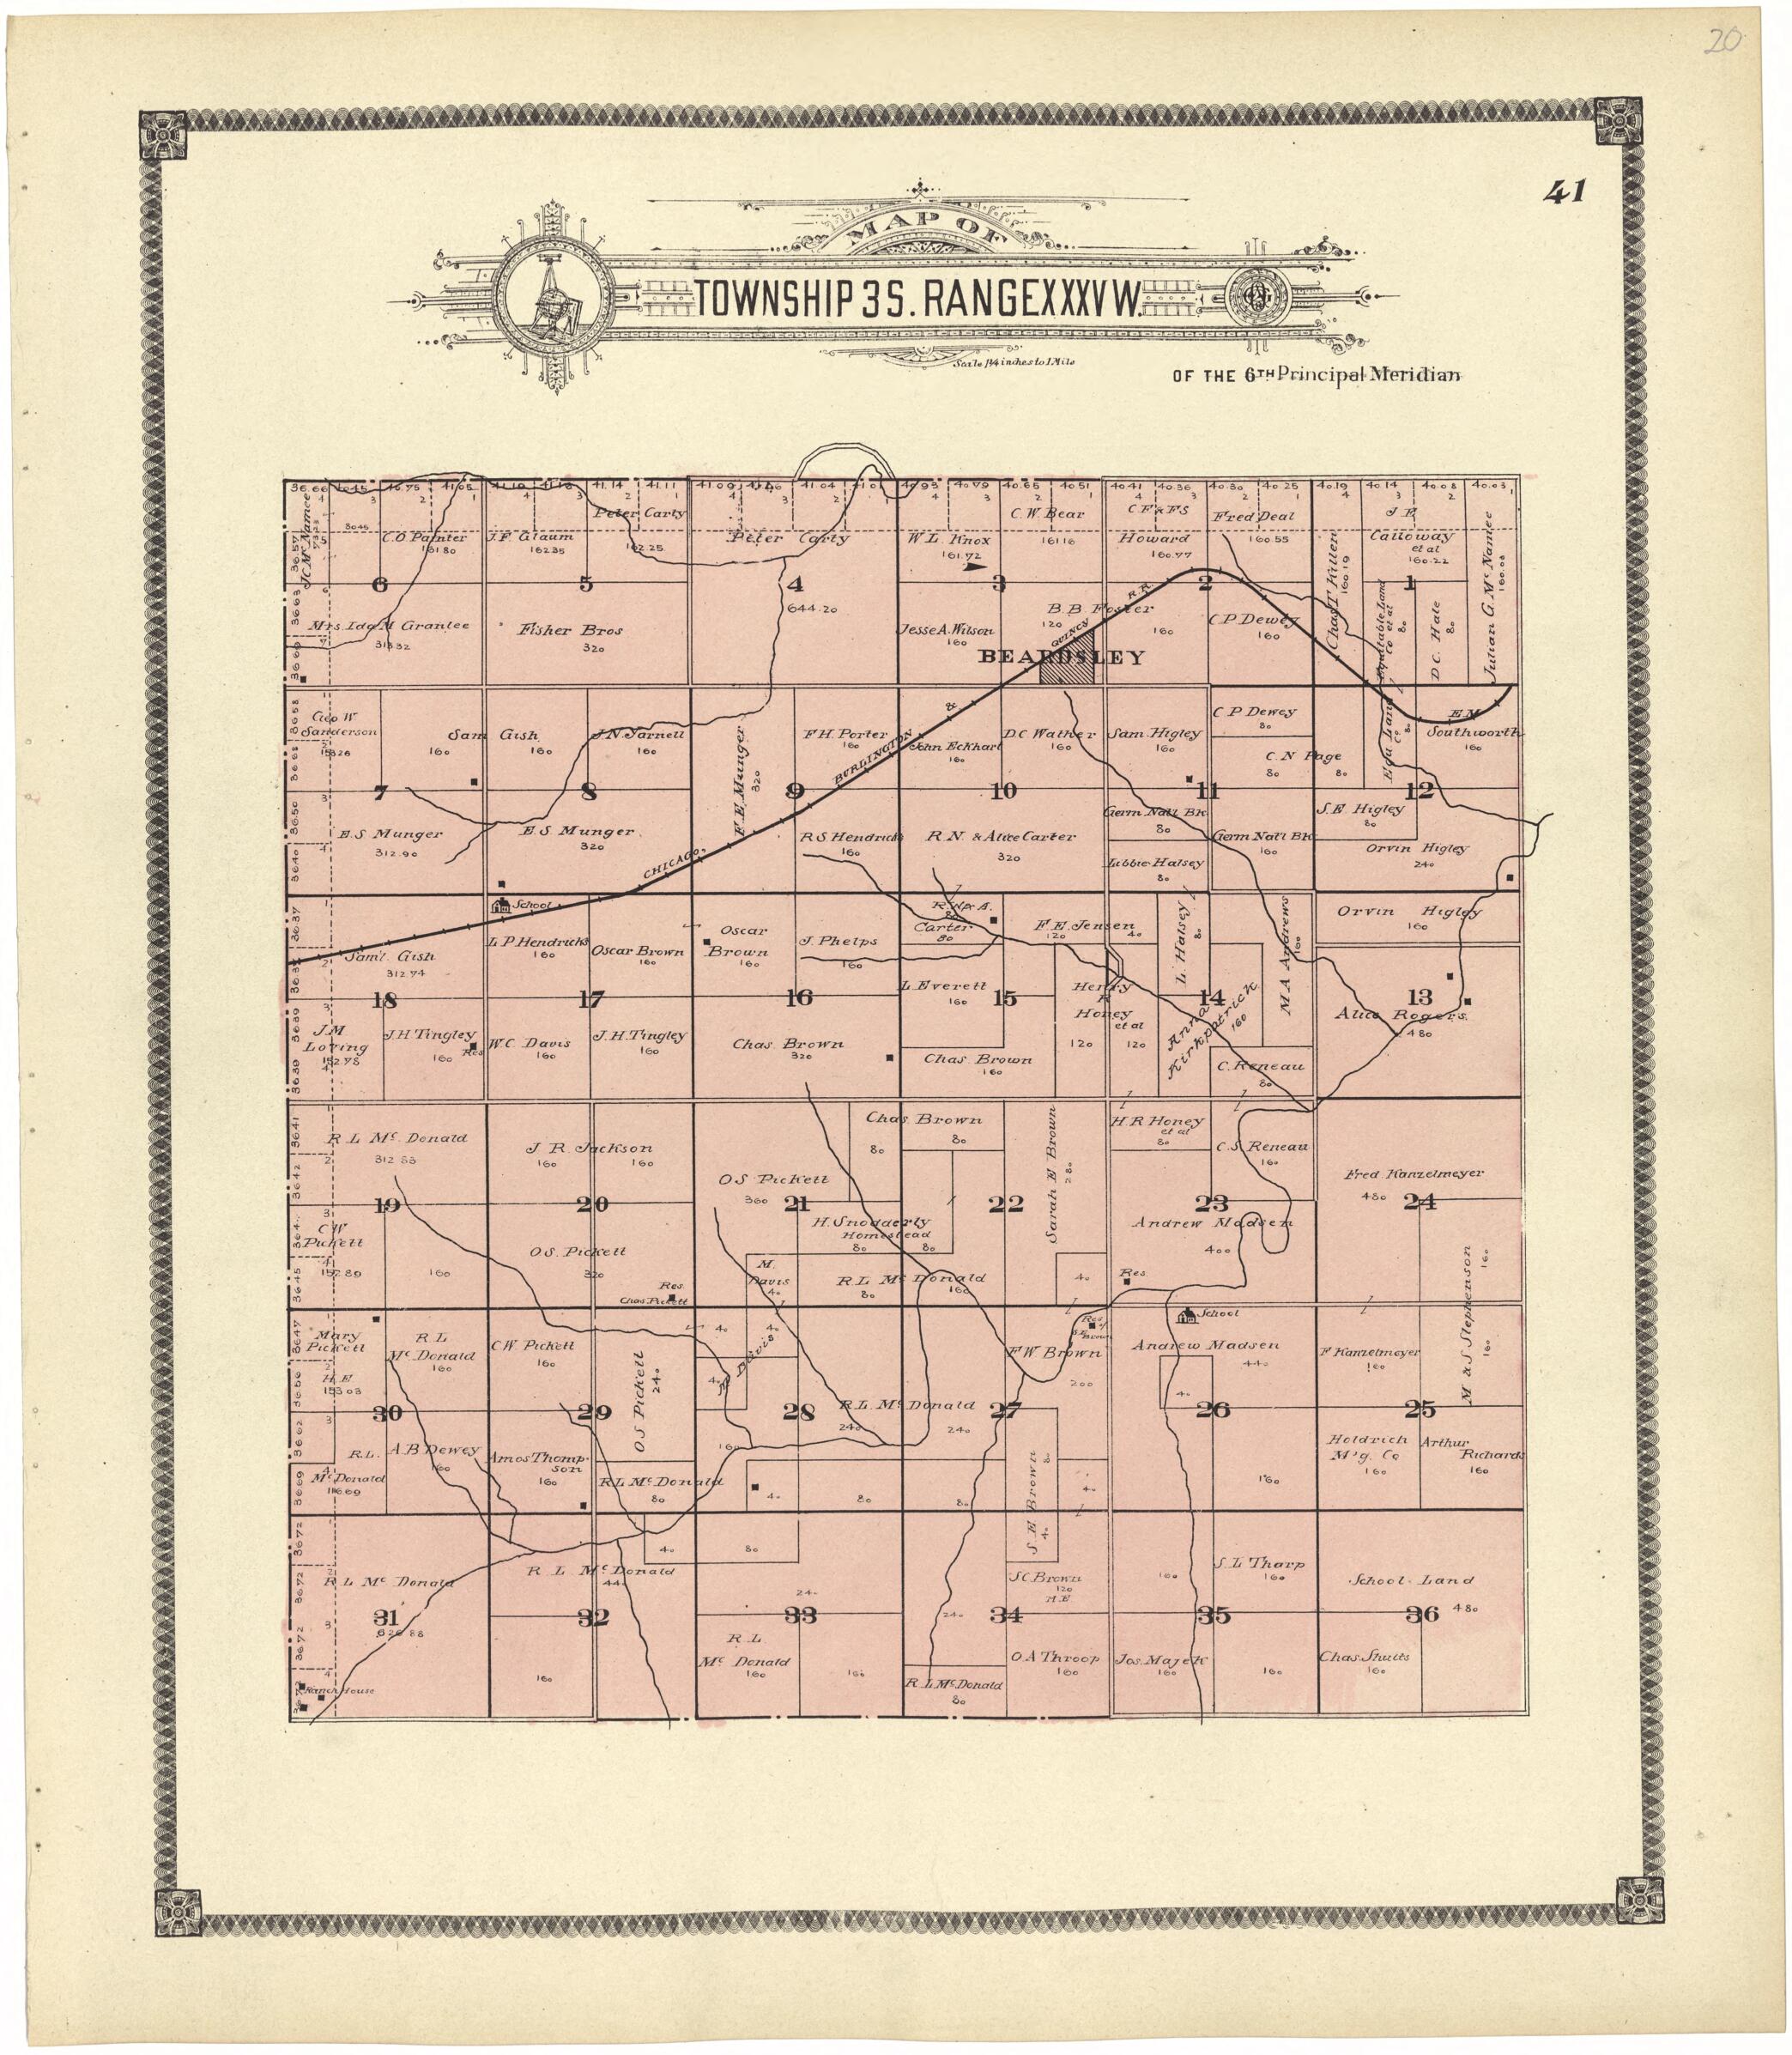 This old map of Map of Township 3 S. Range XXXV W. from Standard Atlas of Rawlins County, Kansas from 1906 was created by  Geo. A. Ogle &amp; Co in 1906